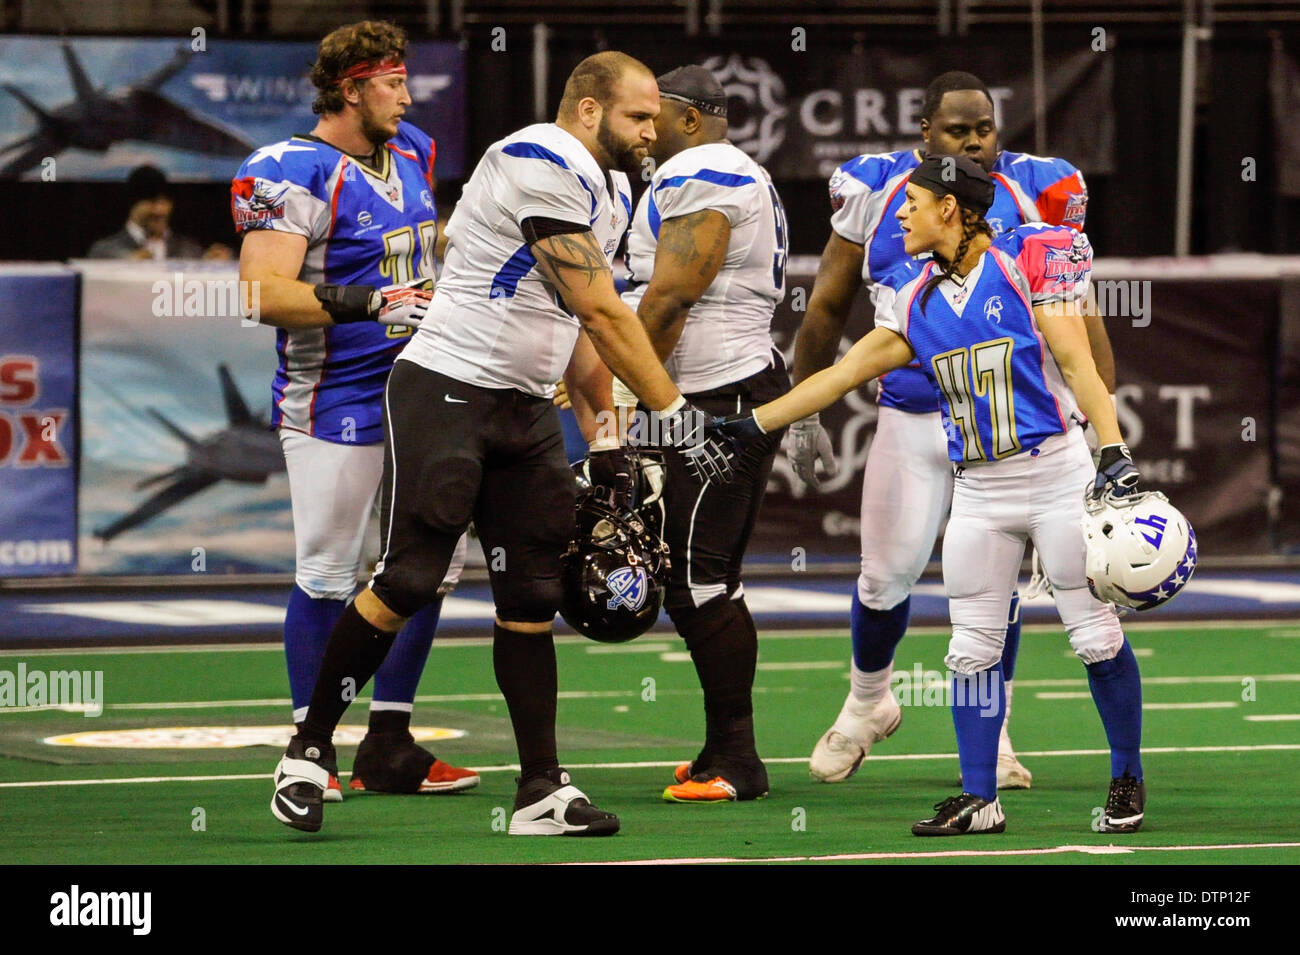 Allen, TX, USA. 21st Feb, 2014. Jennifer Welter (right) shakes hands with Cedar Rapids Titans' defensive lineman Ben Pister after the Texas Revolution defeated the Titans in an Indoor Football League game at the Allen Event Center Friday, February 21, 2014, in Allen, Texas. The 5-foot-2-inch, 130 pound Welter is the first woman to play professional football at a position other than kicker, she made the final roster of the Texas Revolution of the Indoor Football League, as a running back. © csm/Alamy Live News Stock Photo